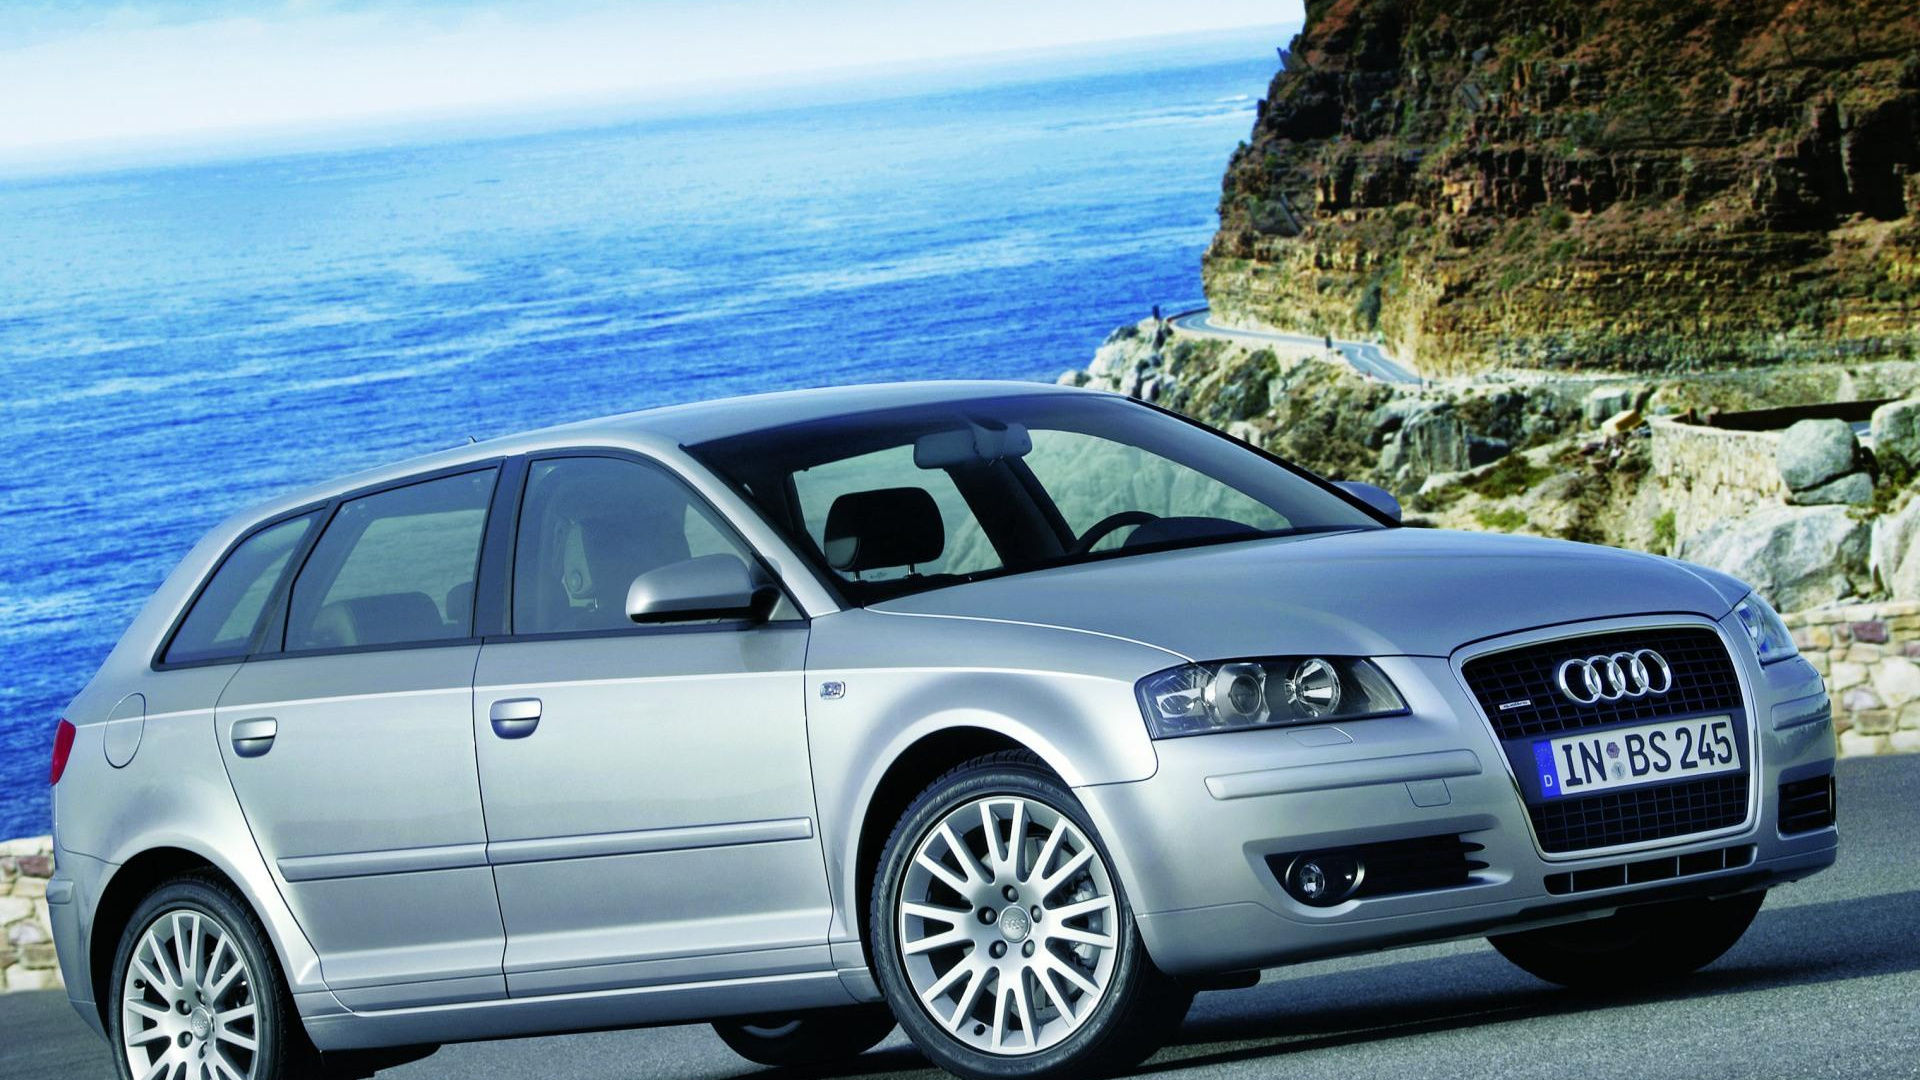 Silver Audi a 4 on Gray Asphalt Road During Daytime. Wallpaper in 1920x1080 Resolution